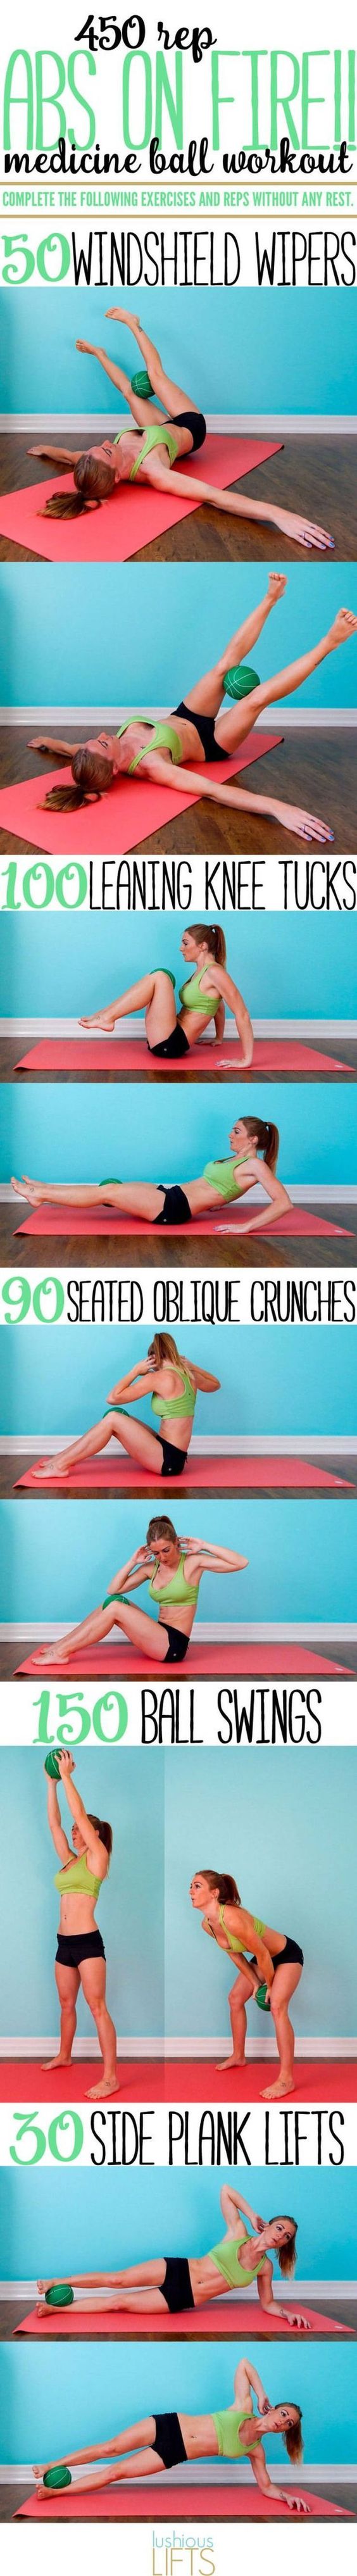 23 Intense Ab Workouts That Will Help You Shed Belly Fat Quickly ...